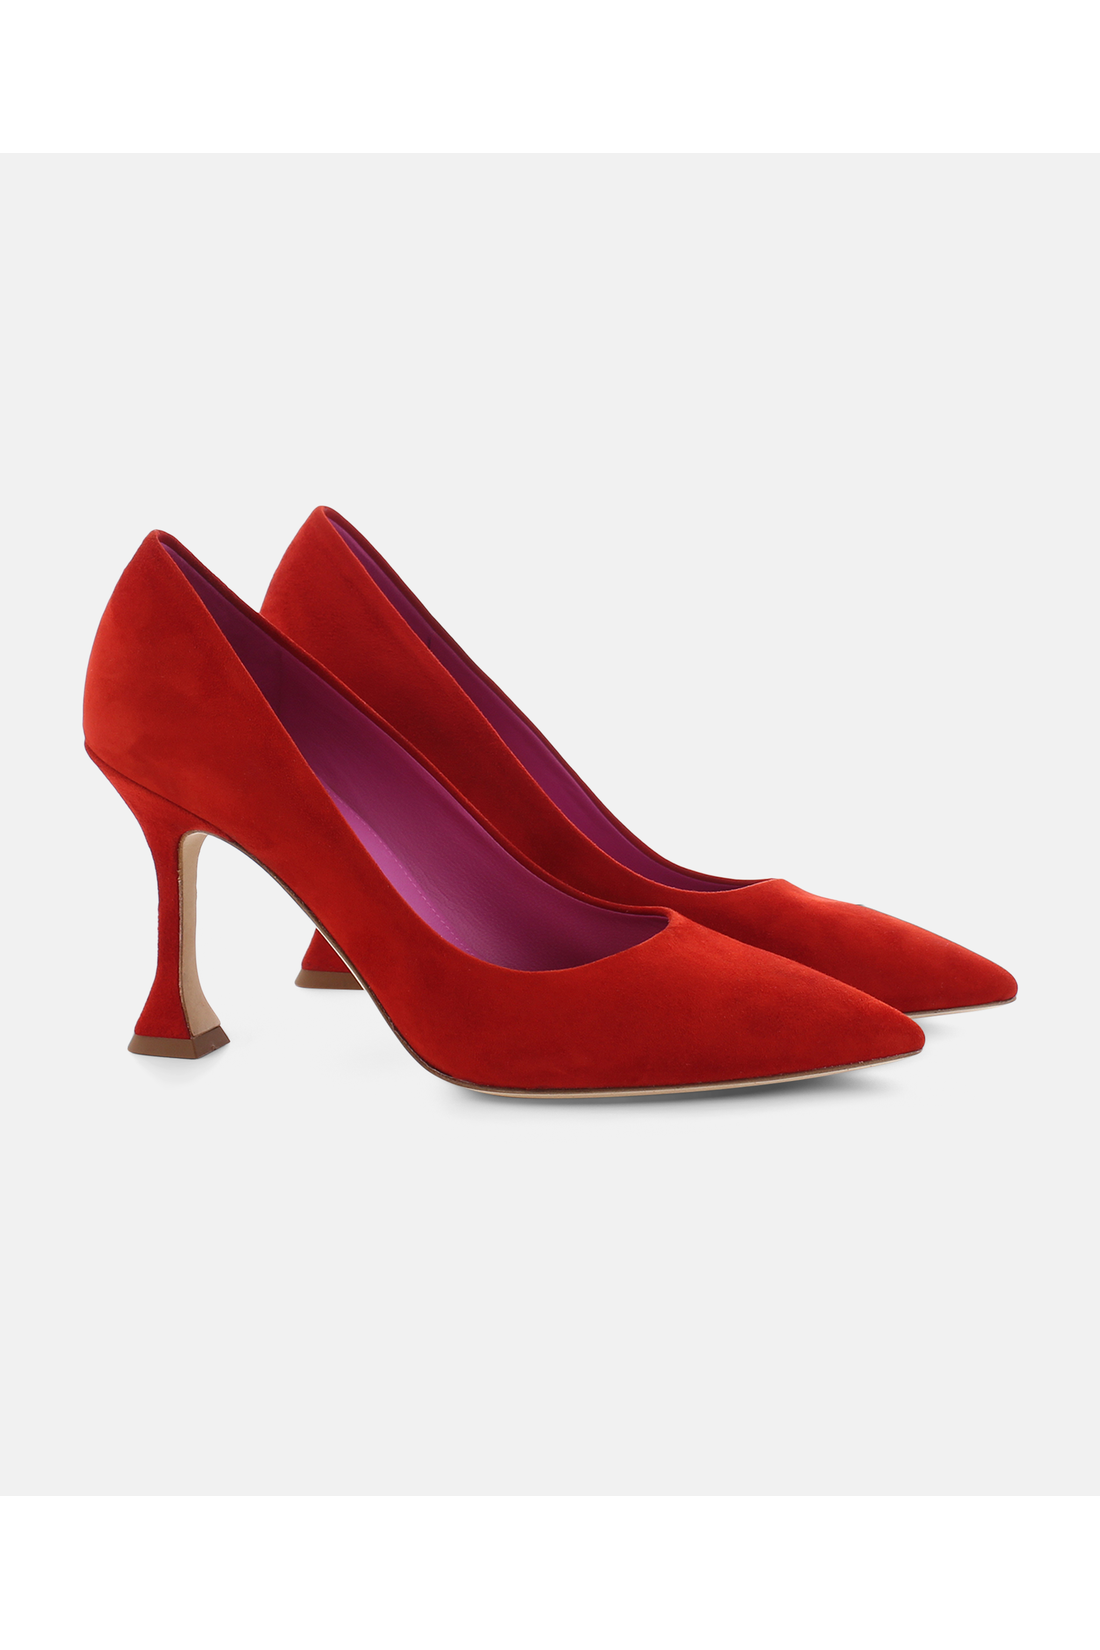 Kennel-Schmenger-OUTLET-SALE-IVY-Pumps-2_5-35-Rot-ARCHIVE-COLLECTION.png